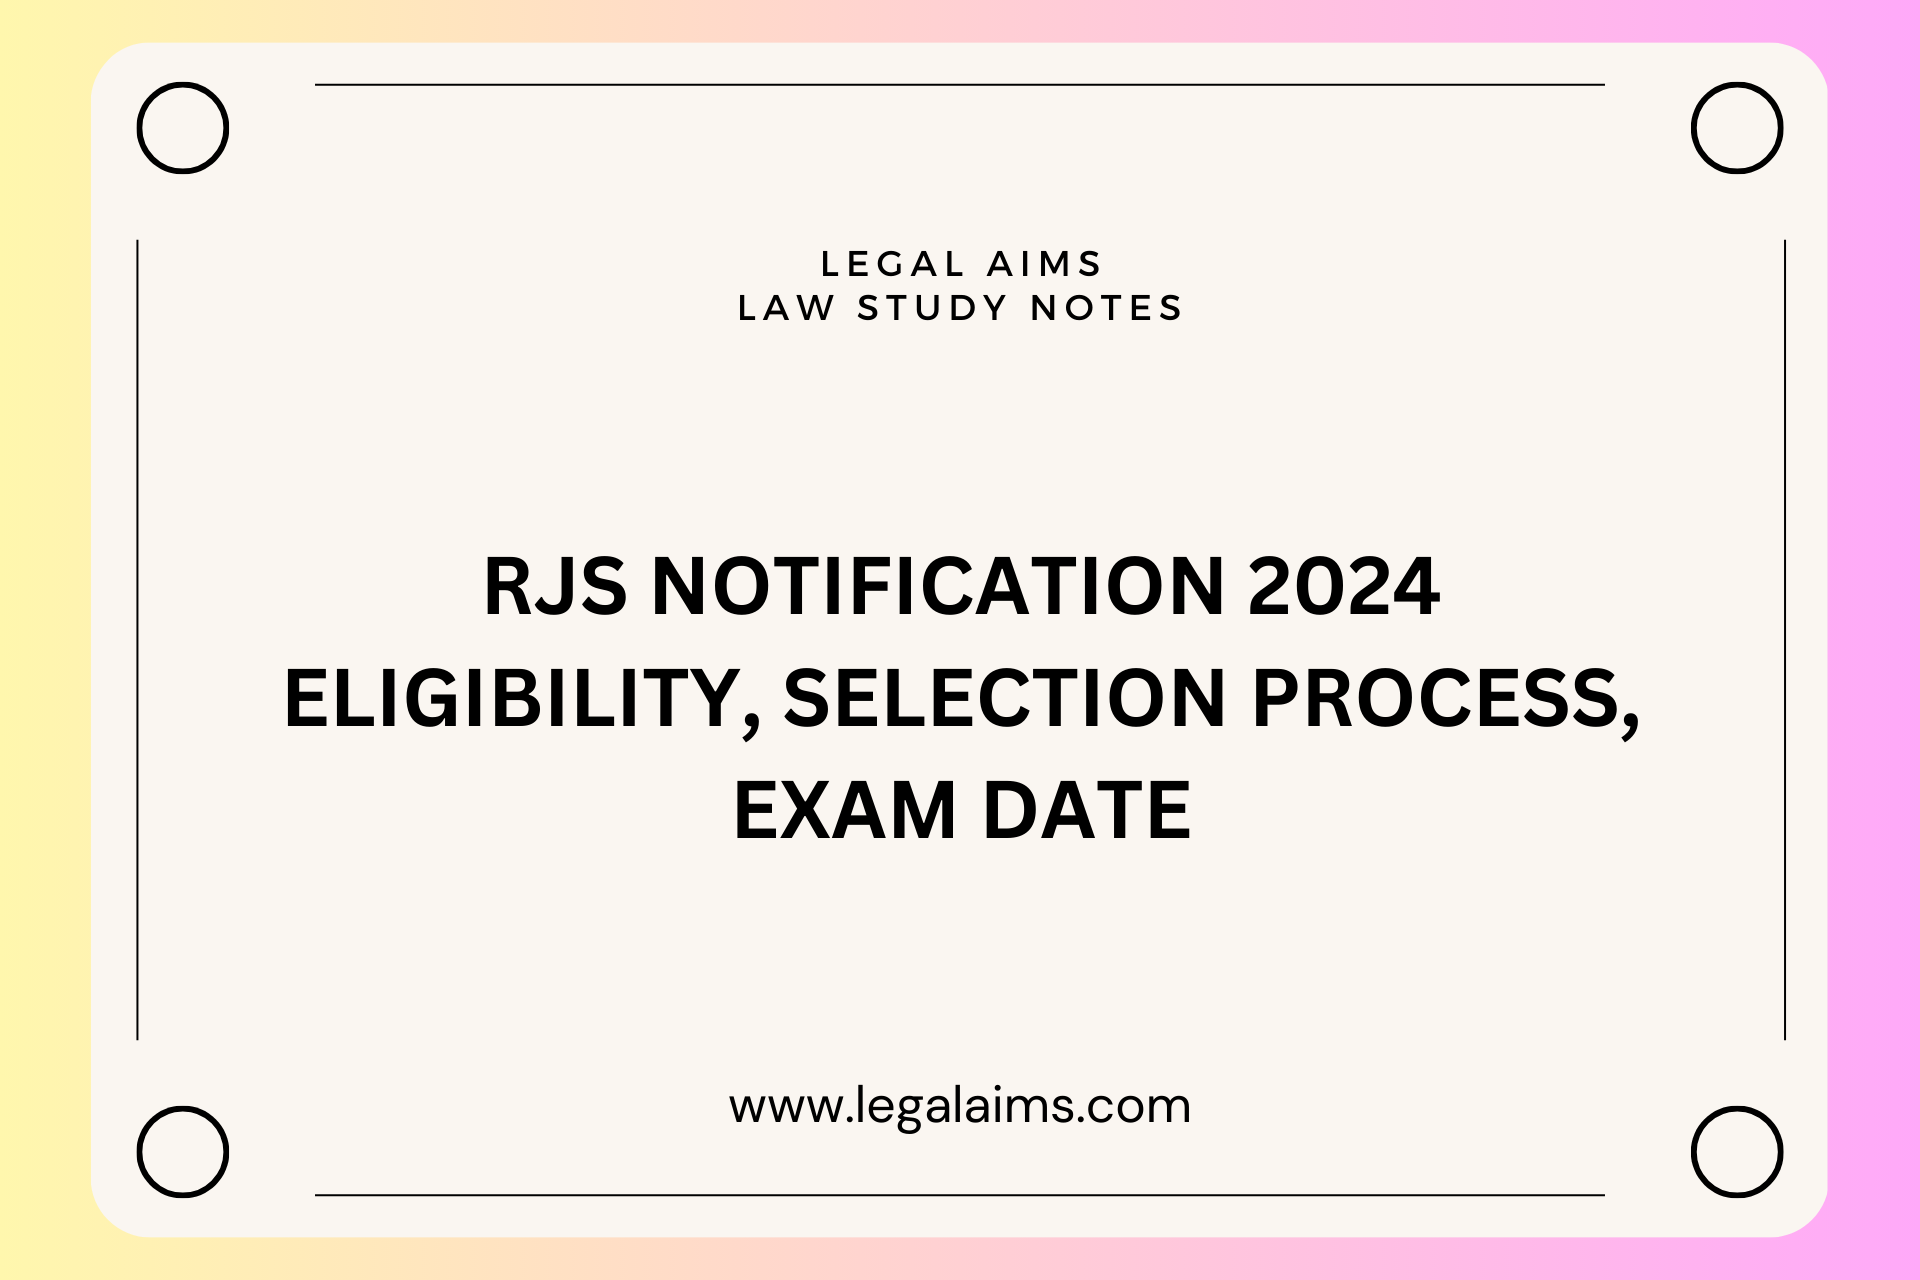 RJS Notification 2024 Eligibility, Selection Process, Exam Date